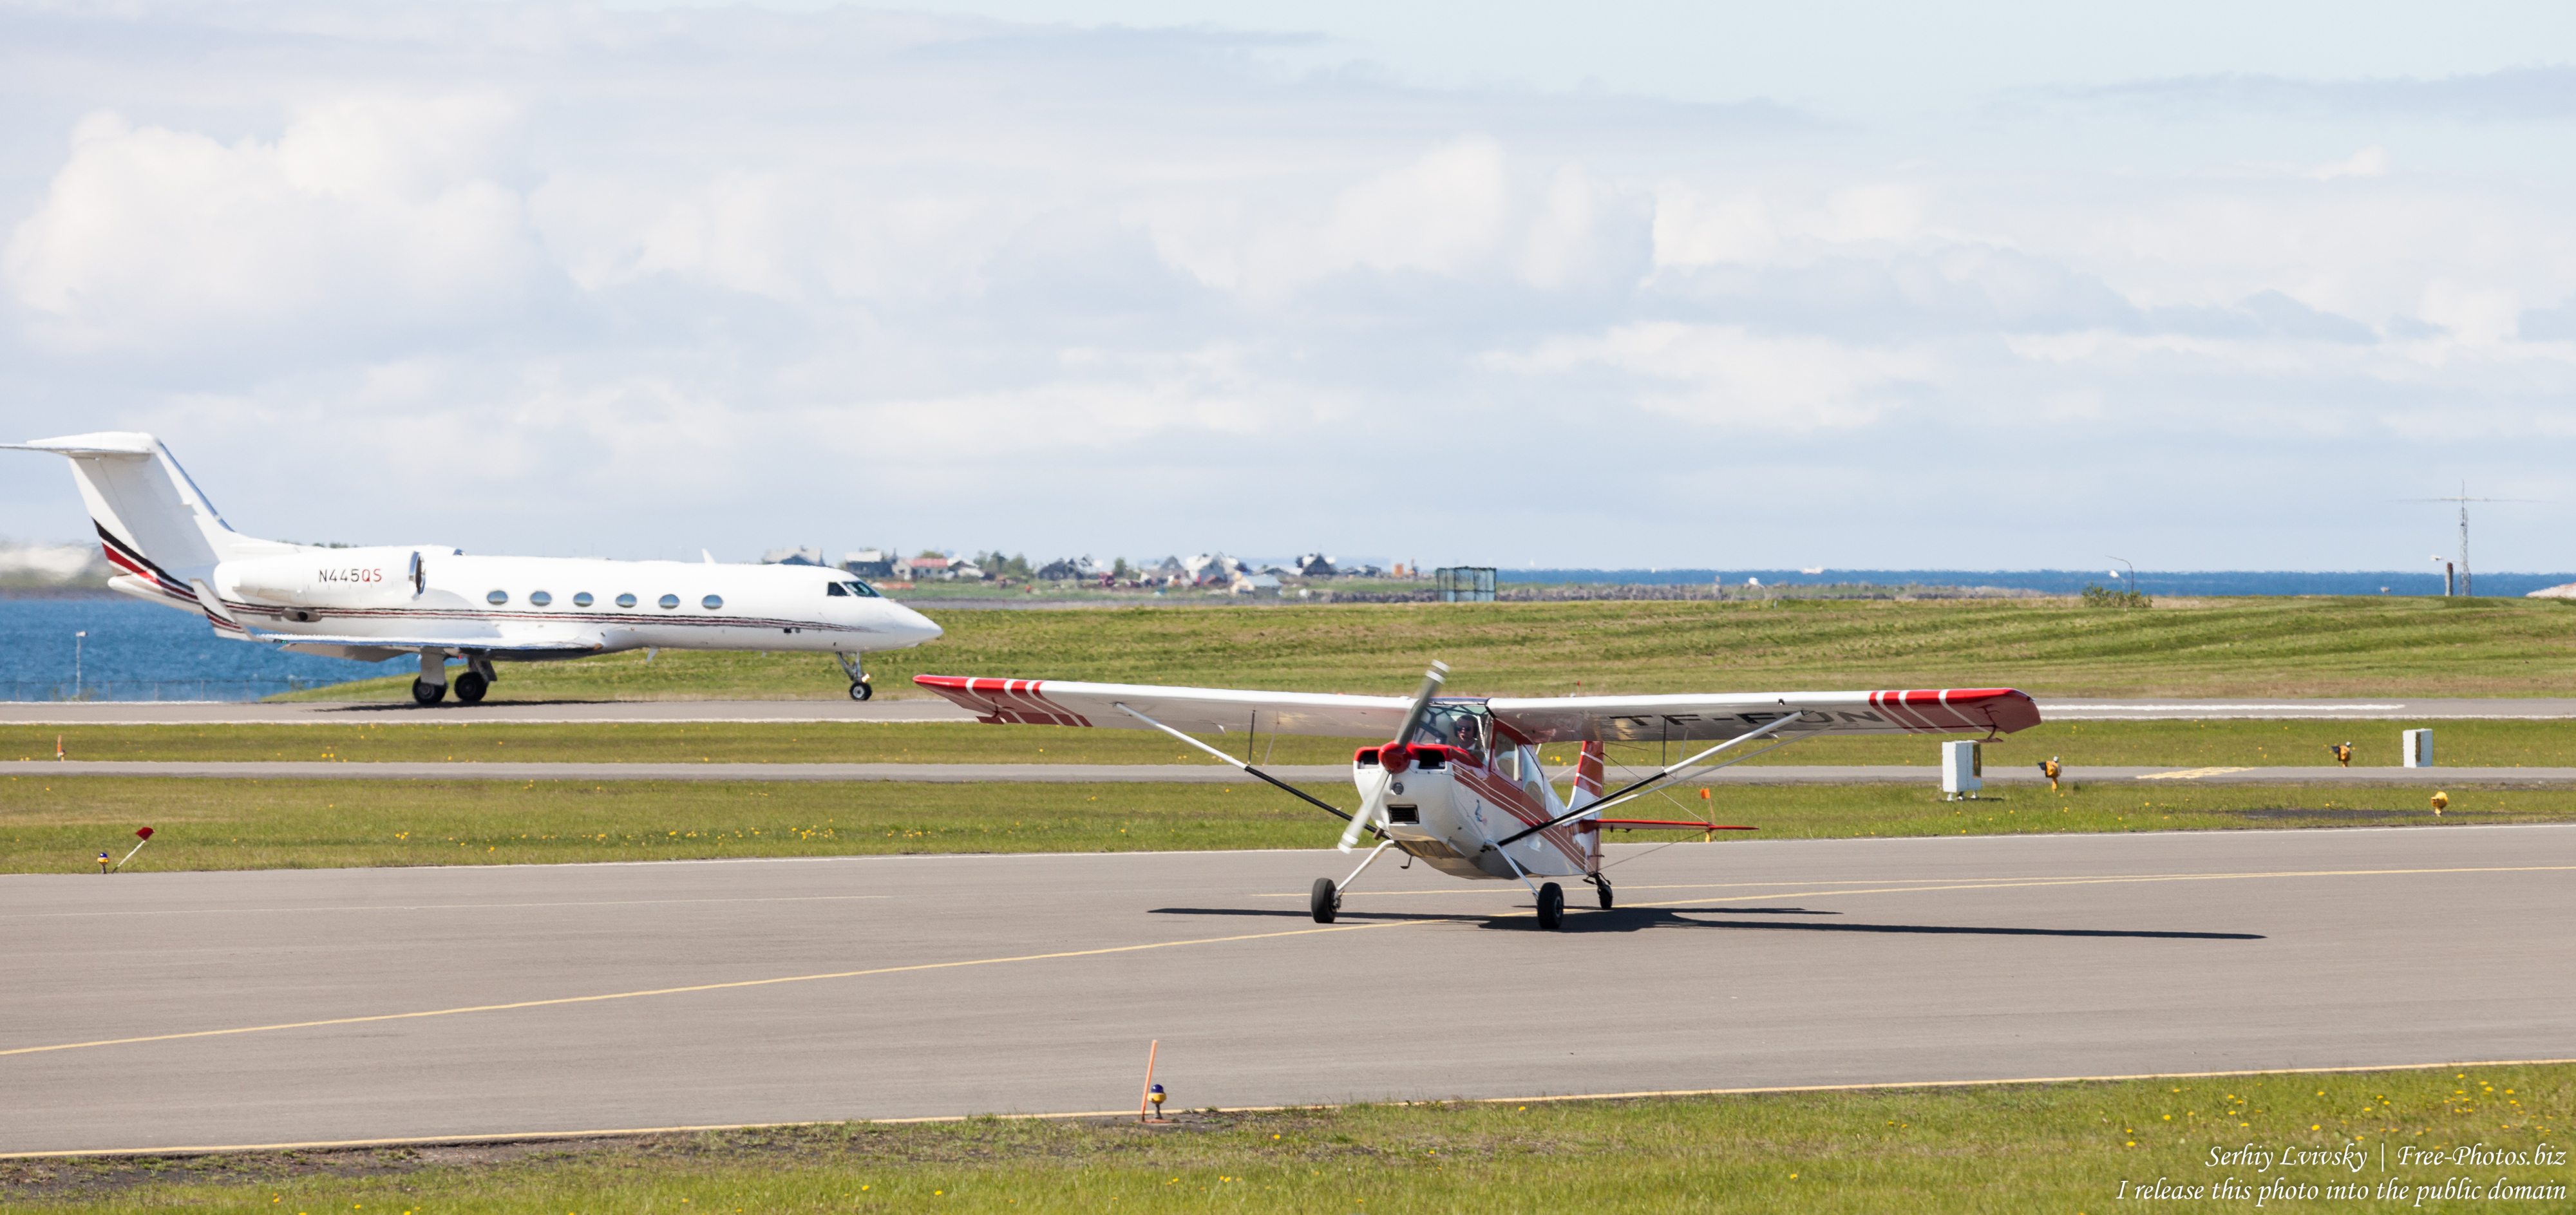 reykjavik_airport_photographed_in_may_2019_by_serhiy_lvivsky_11